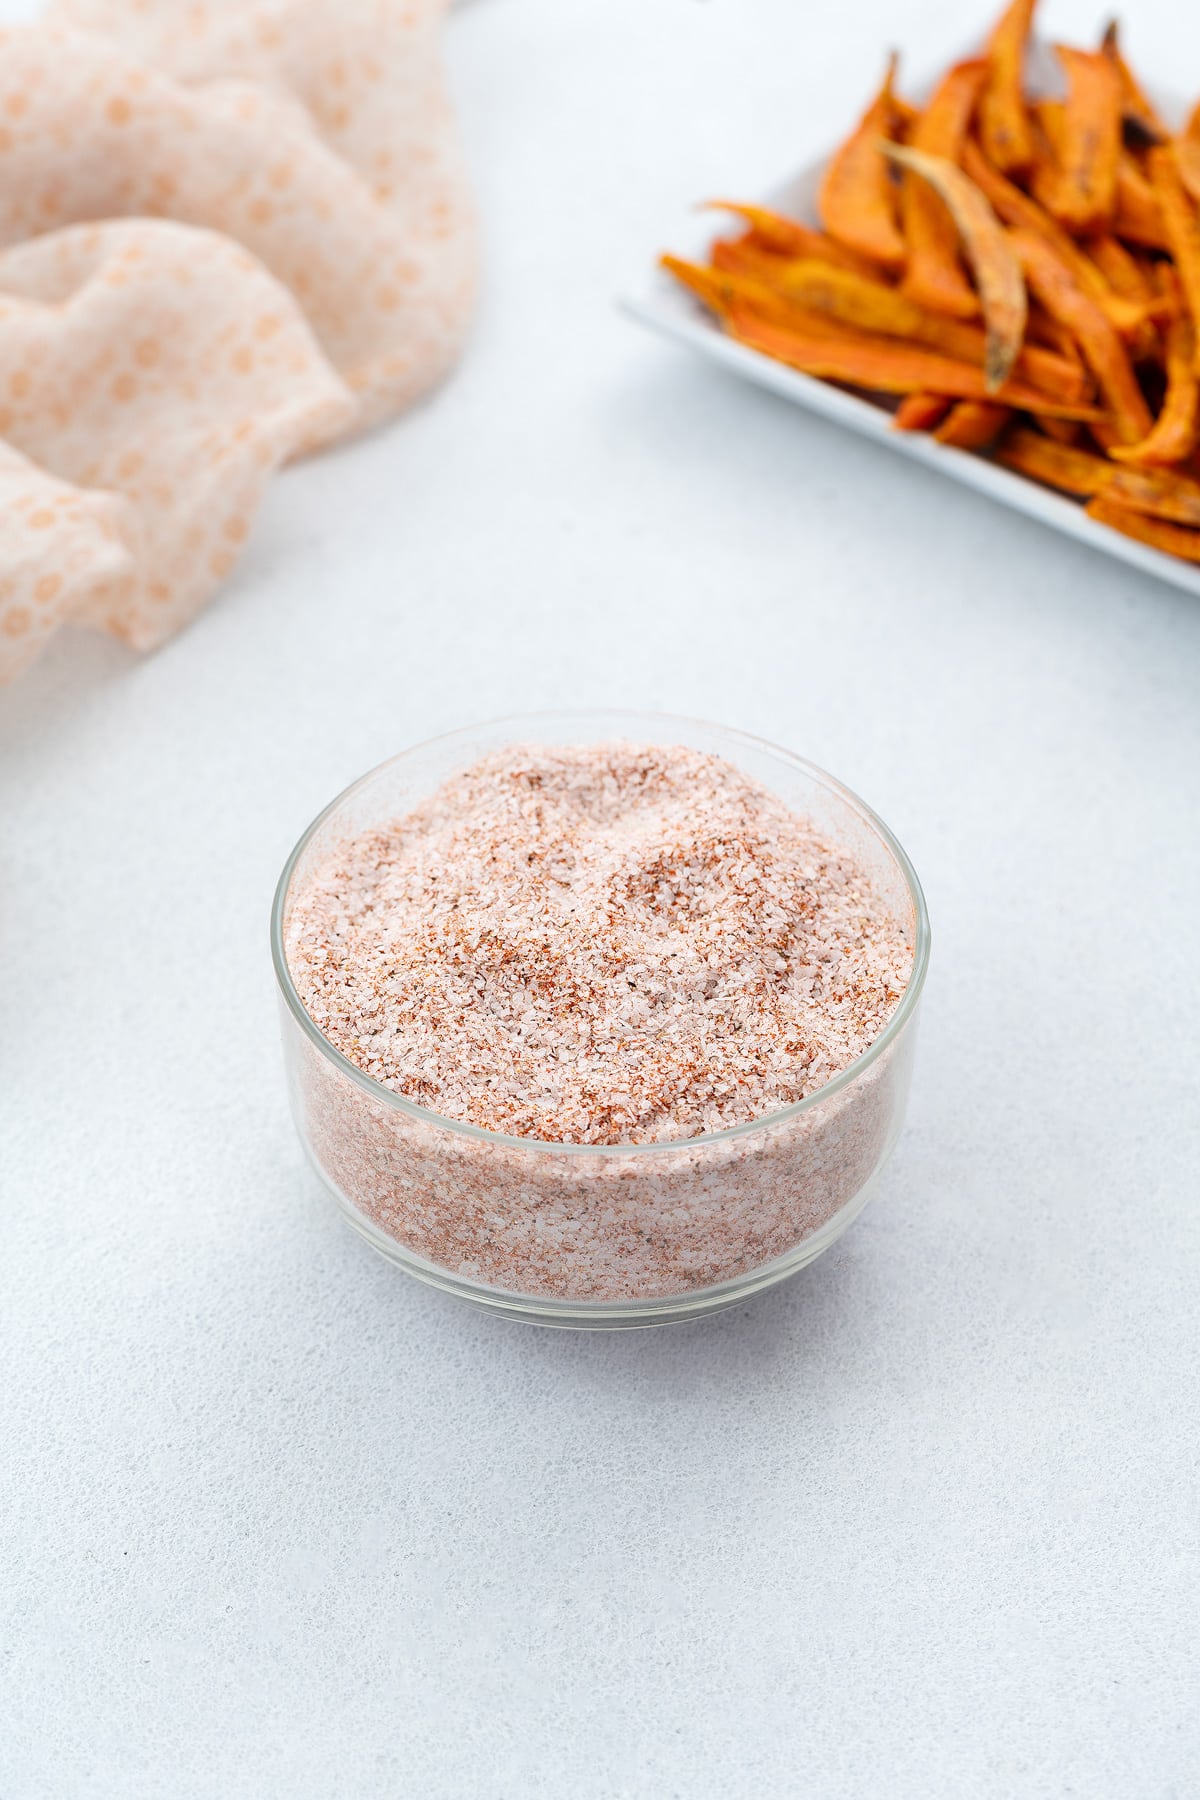 A glass bowl of seasoned salt on a white table, accompanied by a towel and a plate of sweet potato fries nearby.